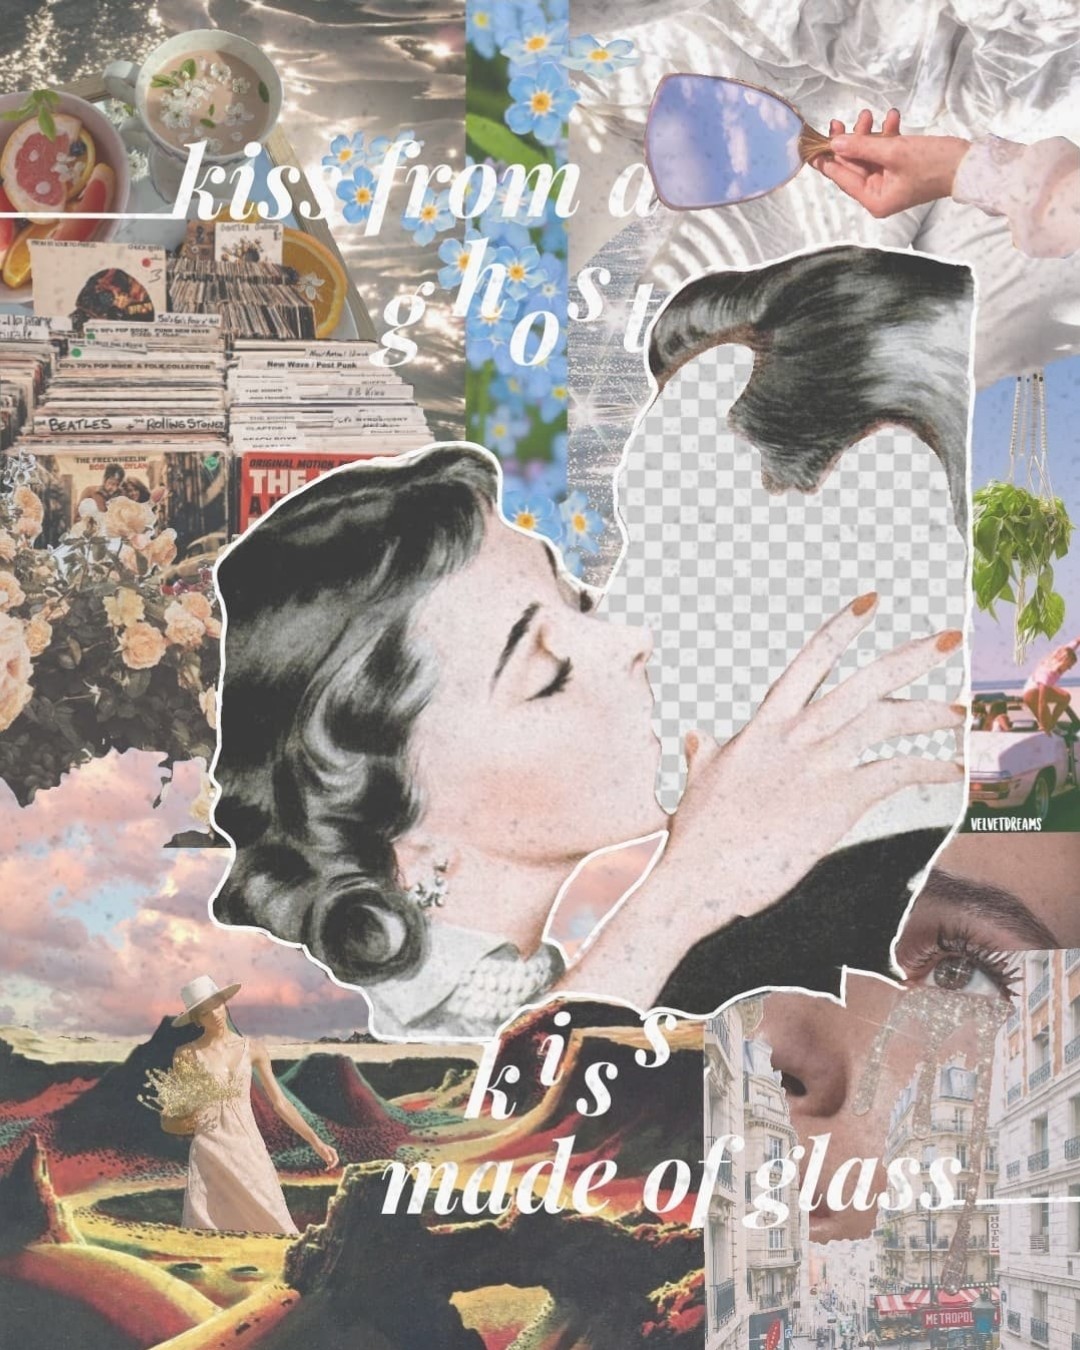 Collage by velvetdreams